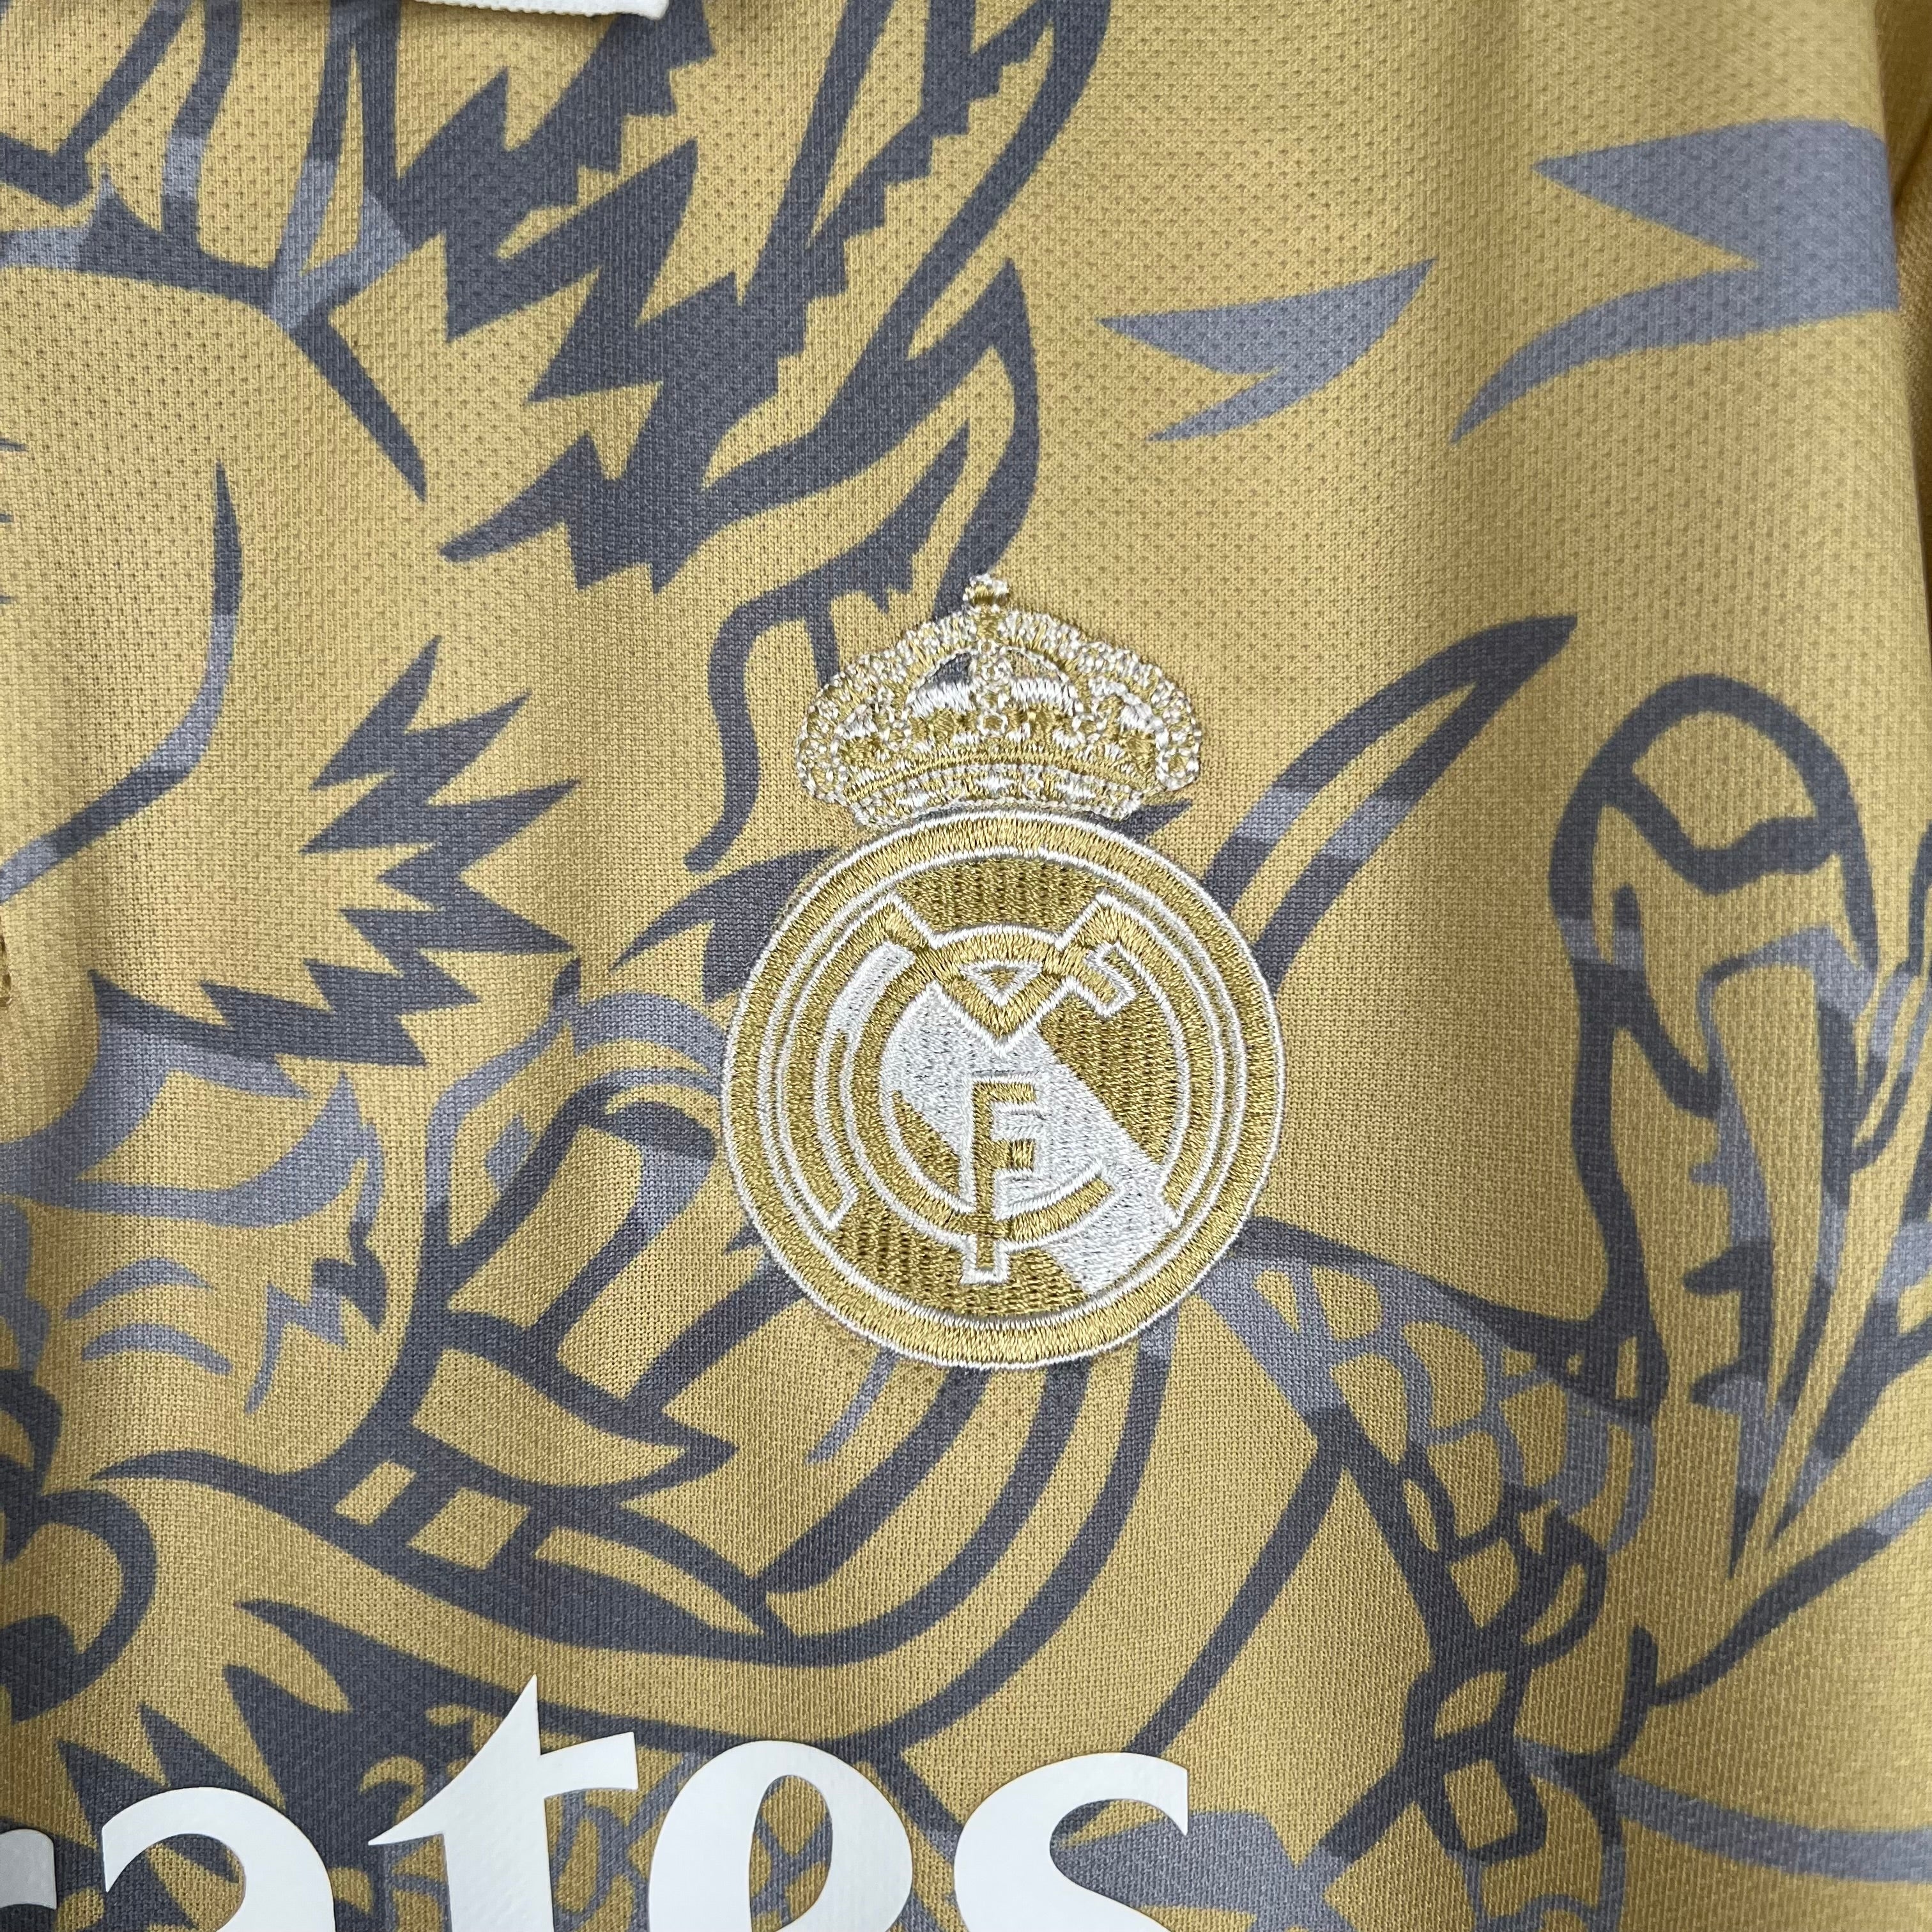 Real Madrid - Special Edition 23/24